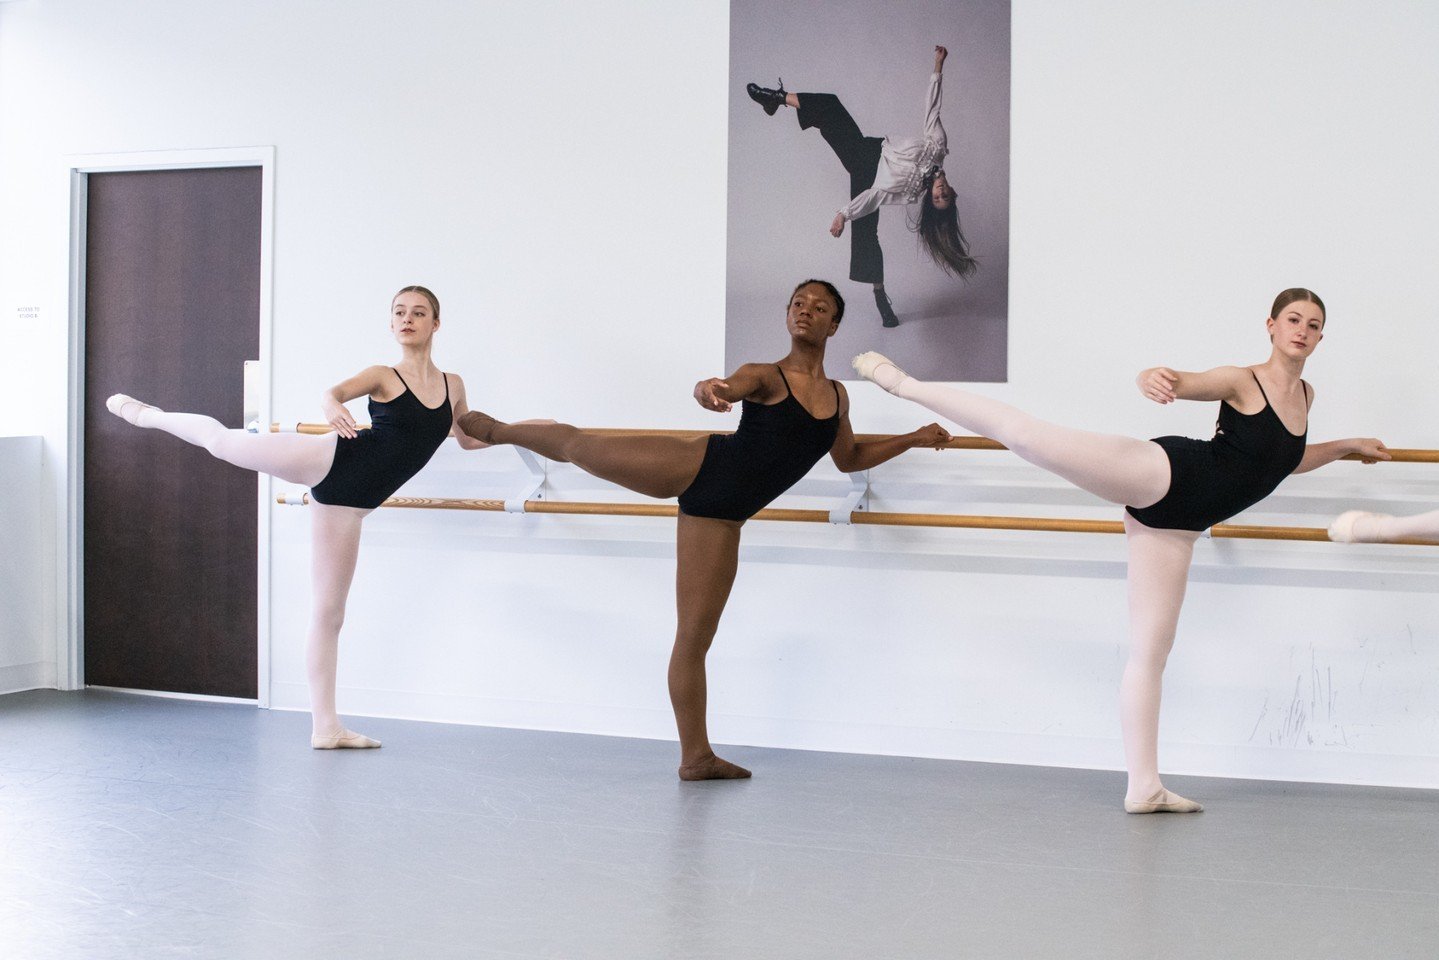 Registration is open for summer classes! 

Session 1 runs June 17-July 3
Session 2 runs July 22-August 7

Get moving in a wide variety of classes available for ages 3 &amp; up in ballet, tap, jazz, contemporary dance, and more!

Visit the link in our